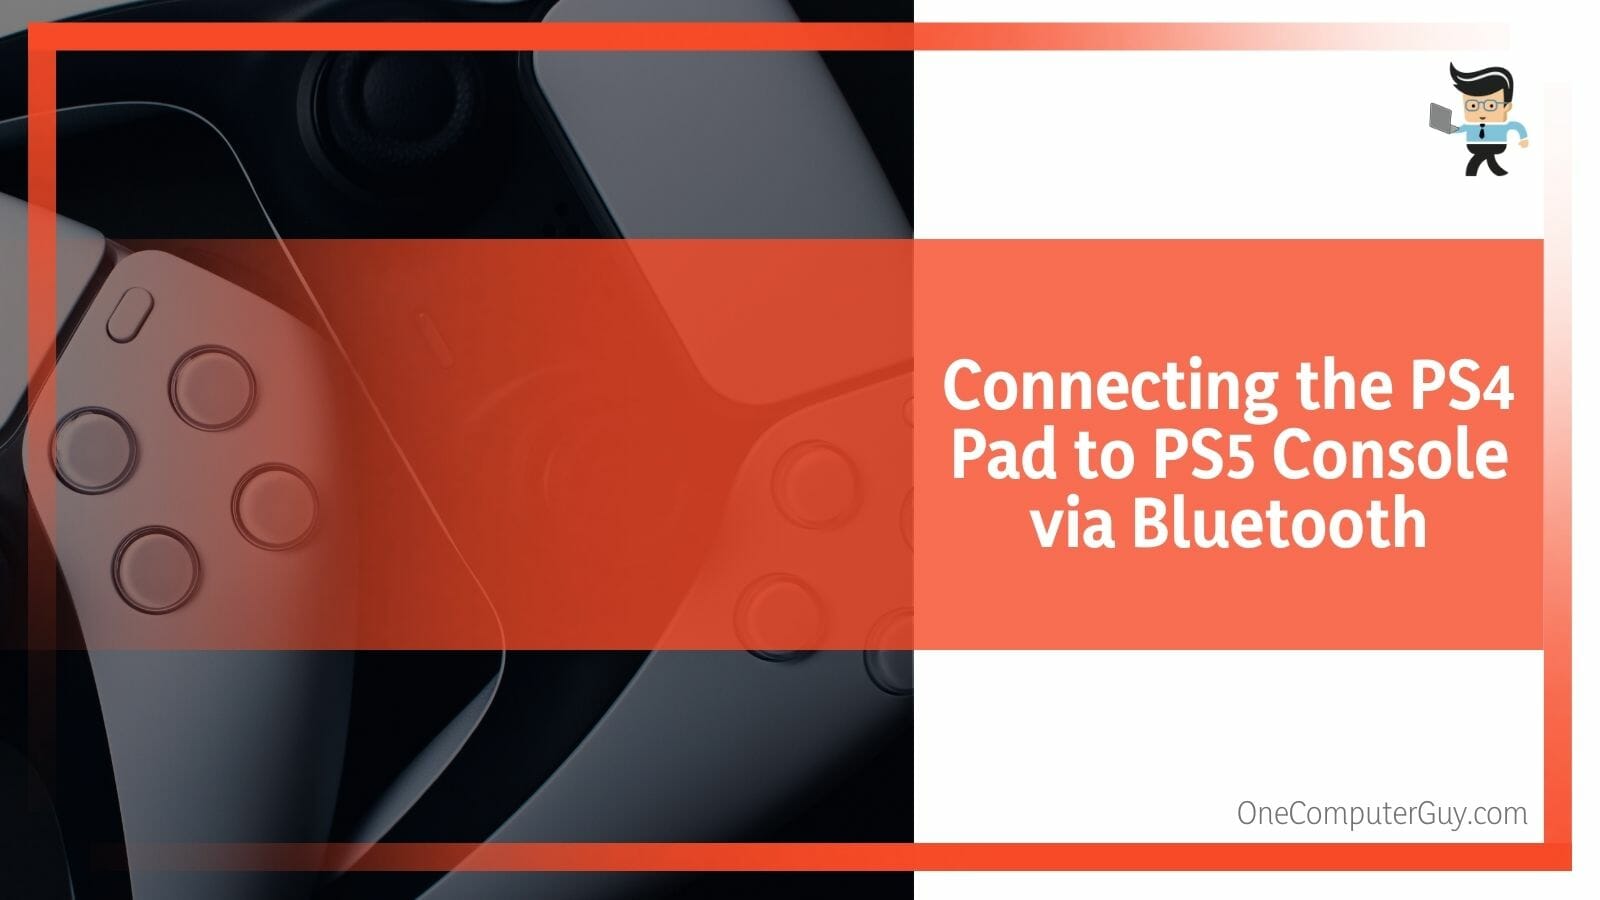 Connecting the PS4 Pad to PS5 Console via Bluetooth